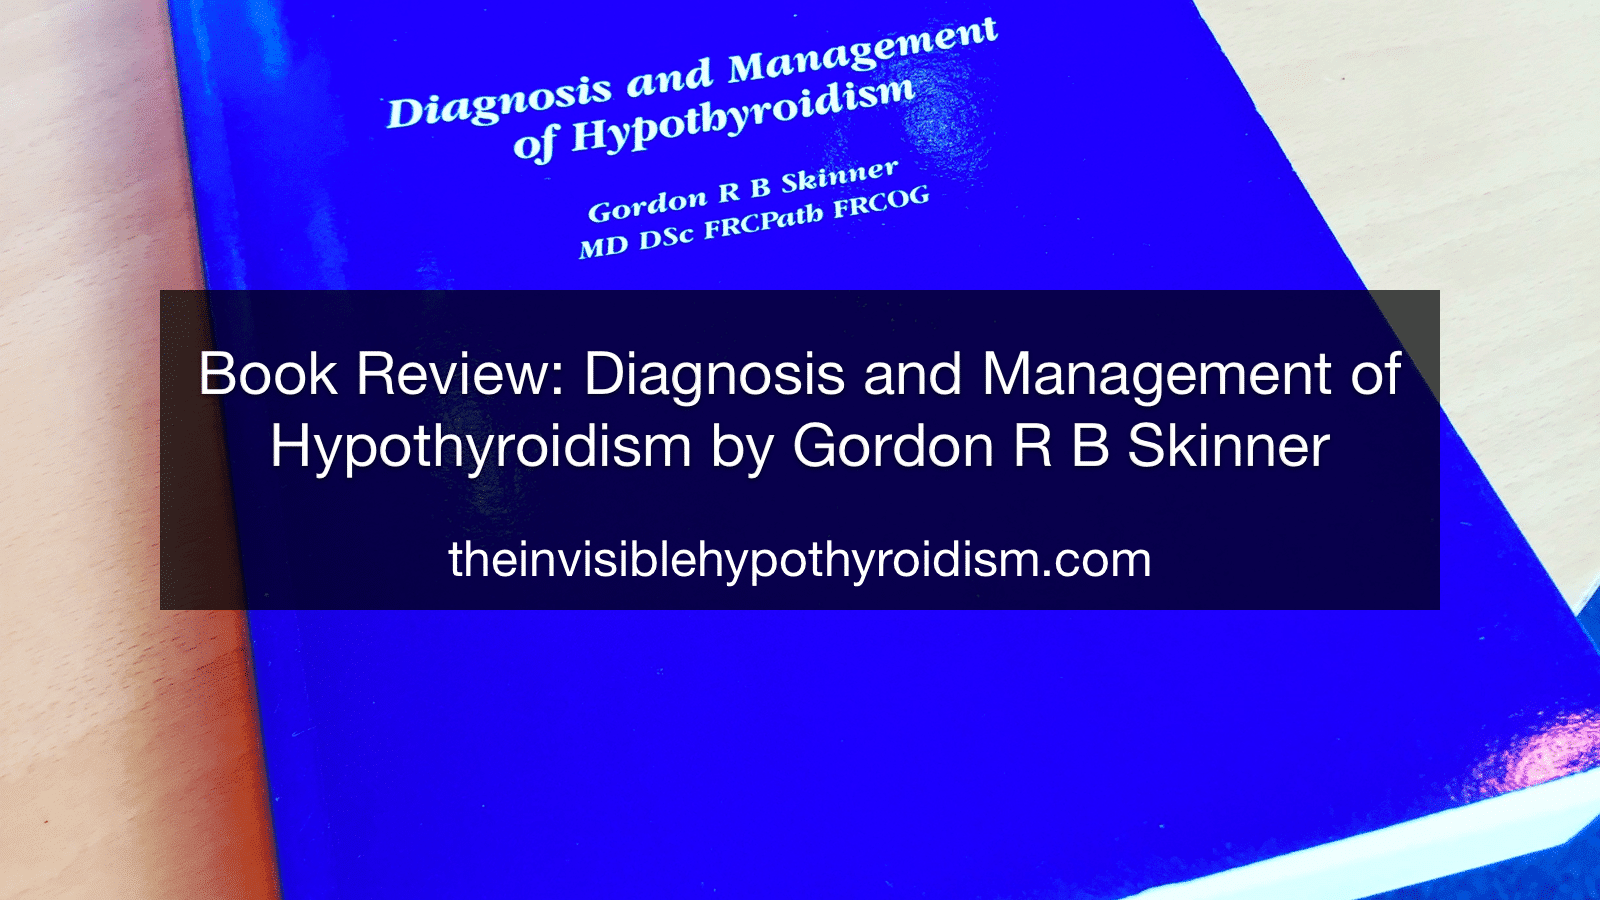 Book Review: Diagnosis and Management of Hypothyroidism by Gordon R B Skinner, MD, DSc, FRCPath, FRCOG